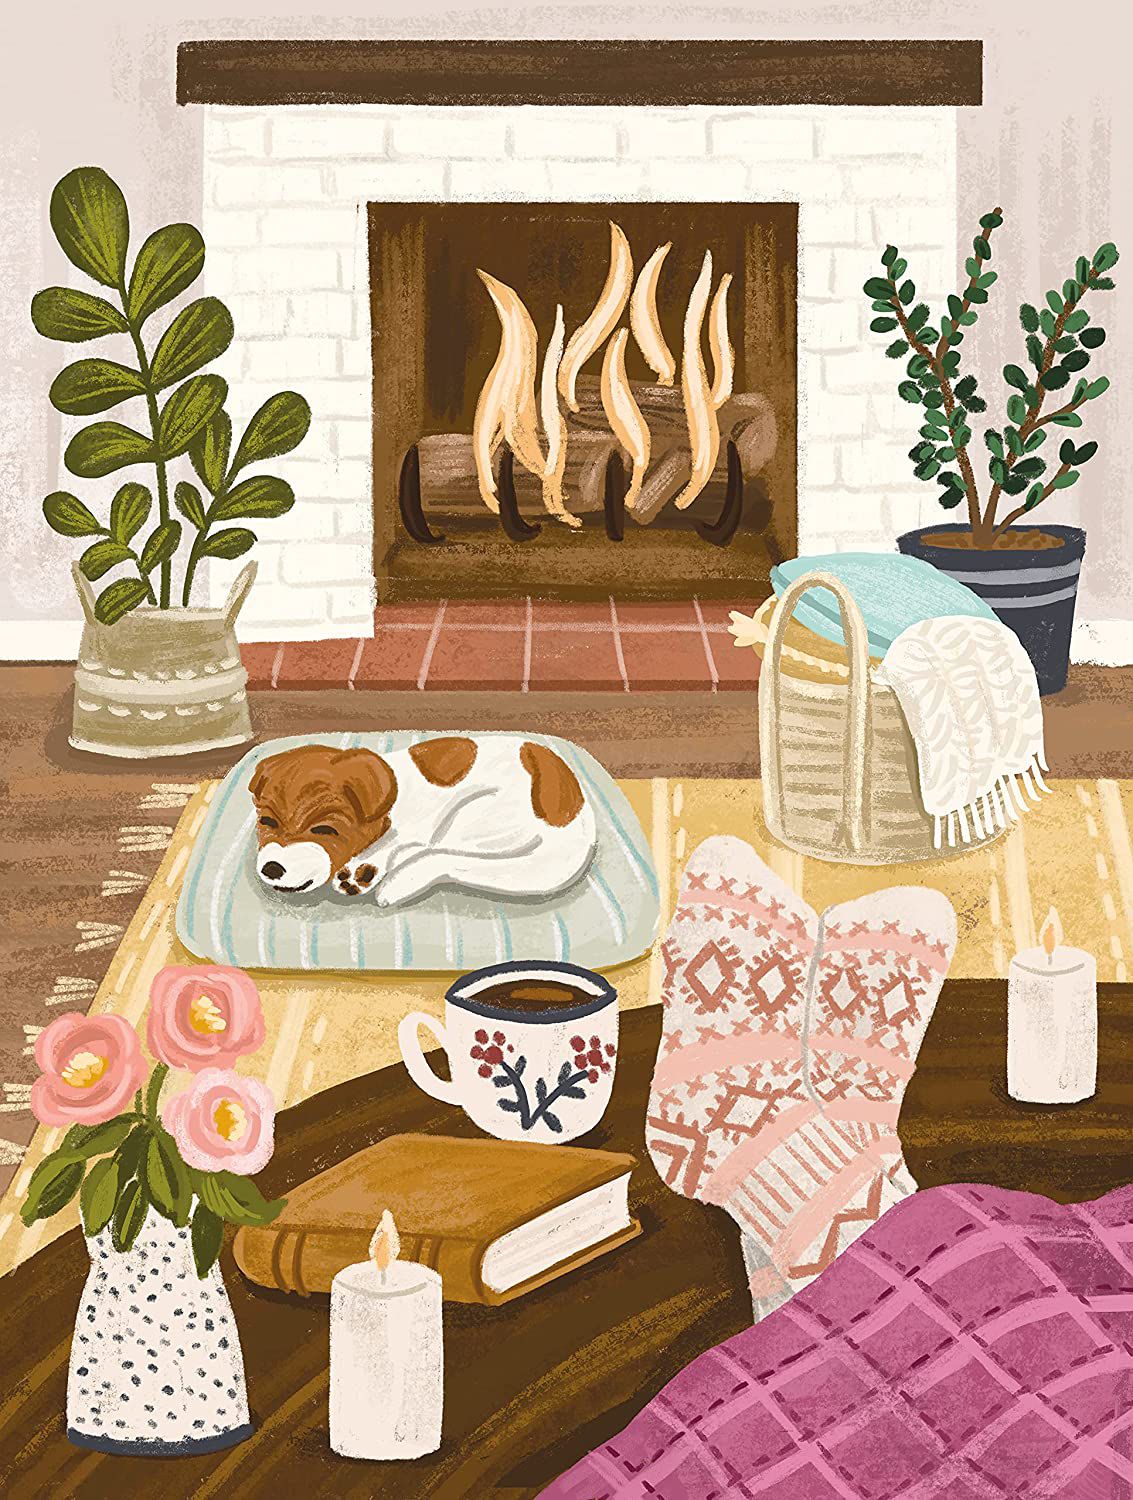 Image of a cozy puzzle scene featuring a fire place, blanket, candles, a sleeping dog, and a book. 